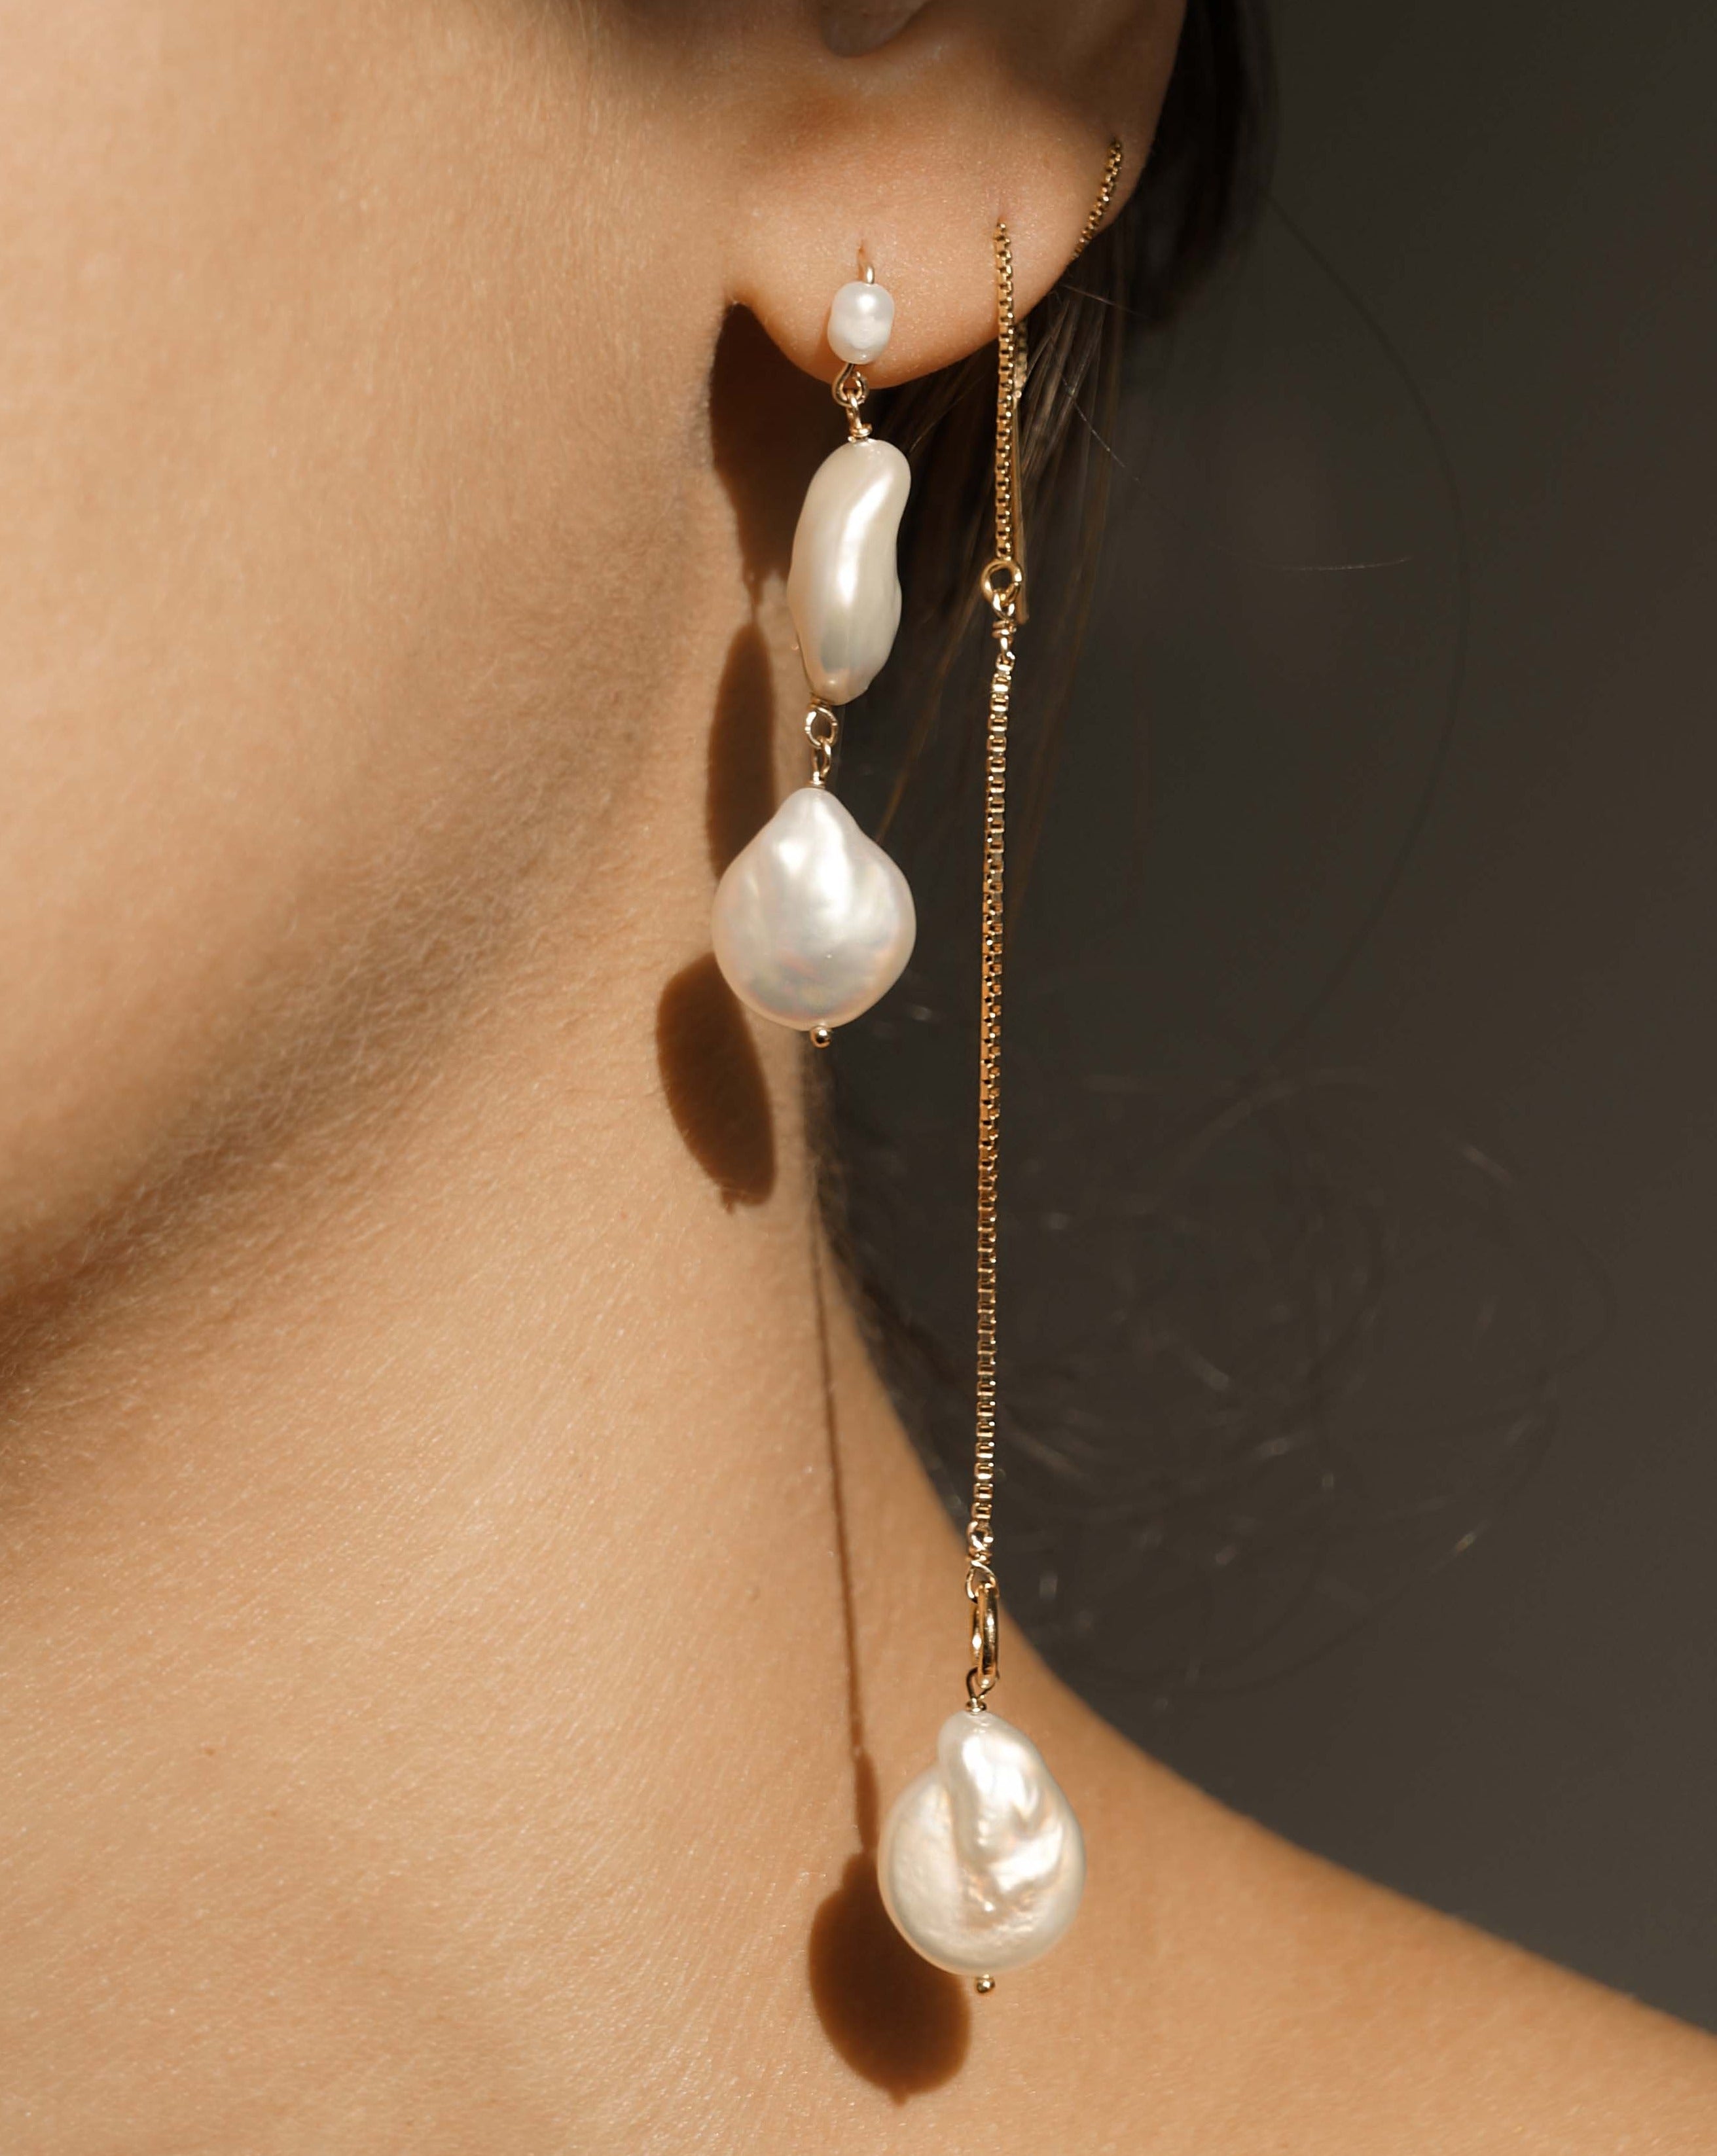 Genesis Threaders by KOZAKH. Threader style earrings with drop length of 2 inches on both sides, crafted in 14K Gold Filled, featuring Baroque Pearls.